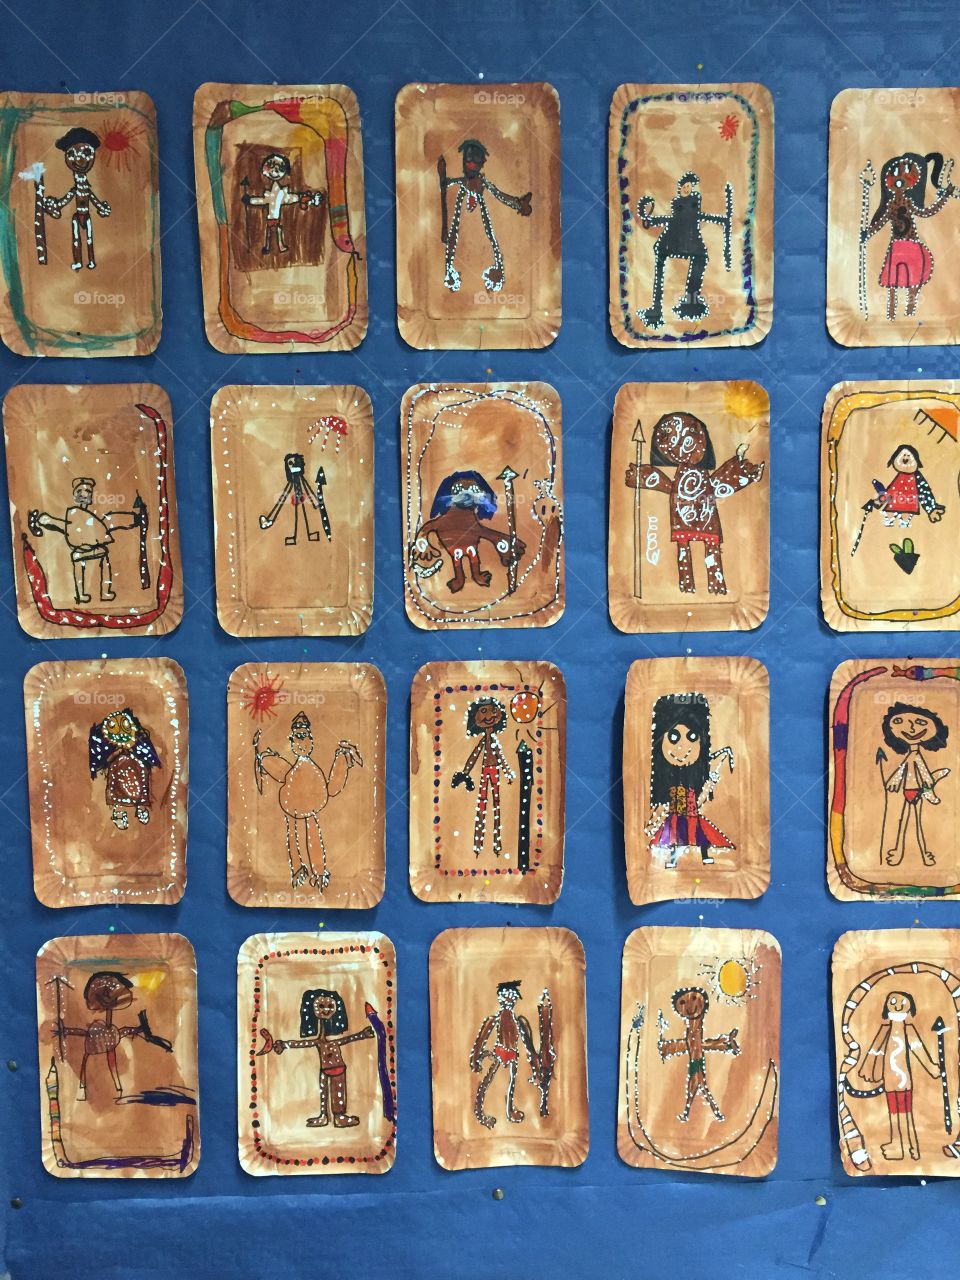 Aborigines by a 6 years old. 